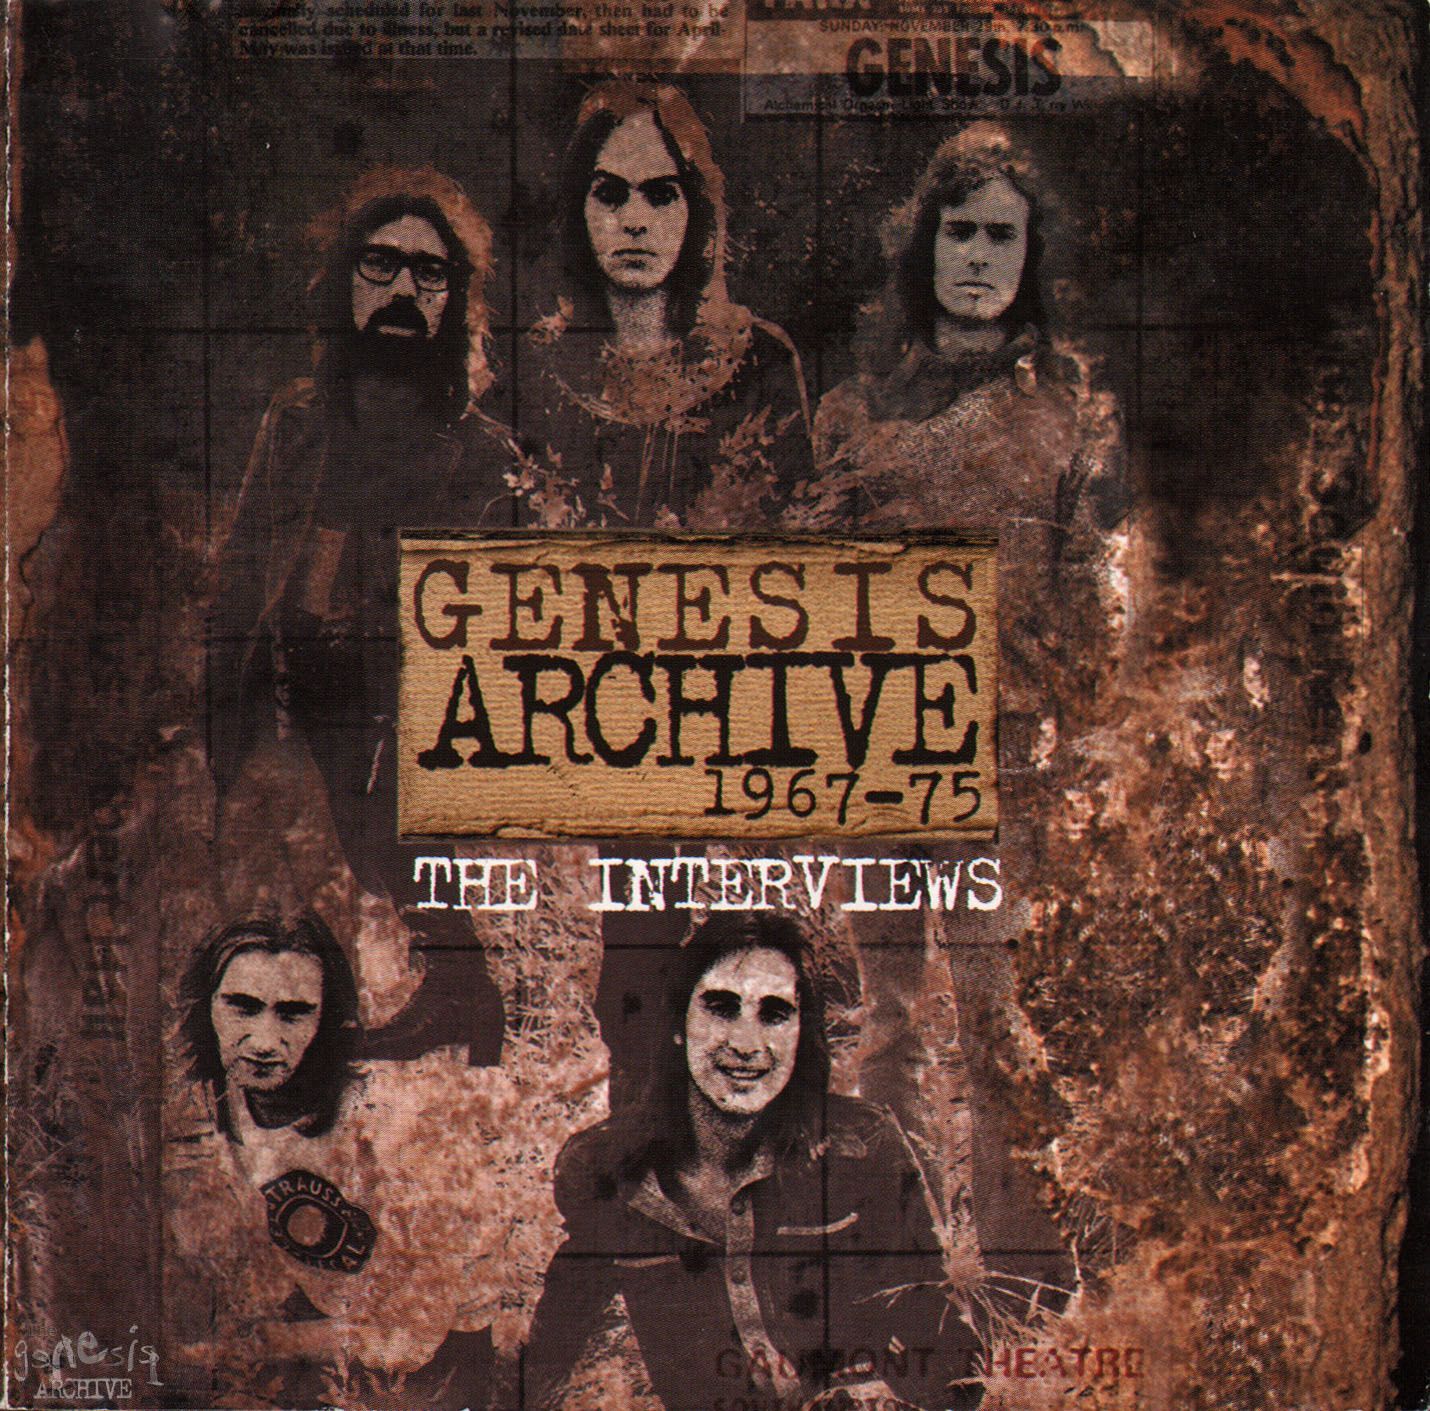 estera temblor átomo Genesis Archive One 1967 to 1975 Interview Double CD – The Genesis Archive